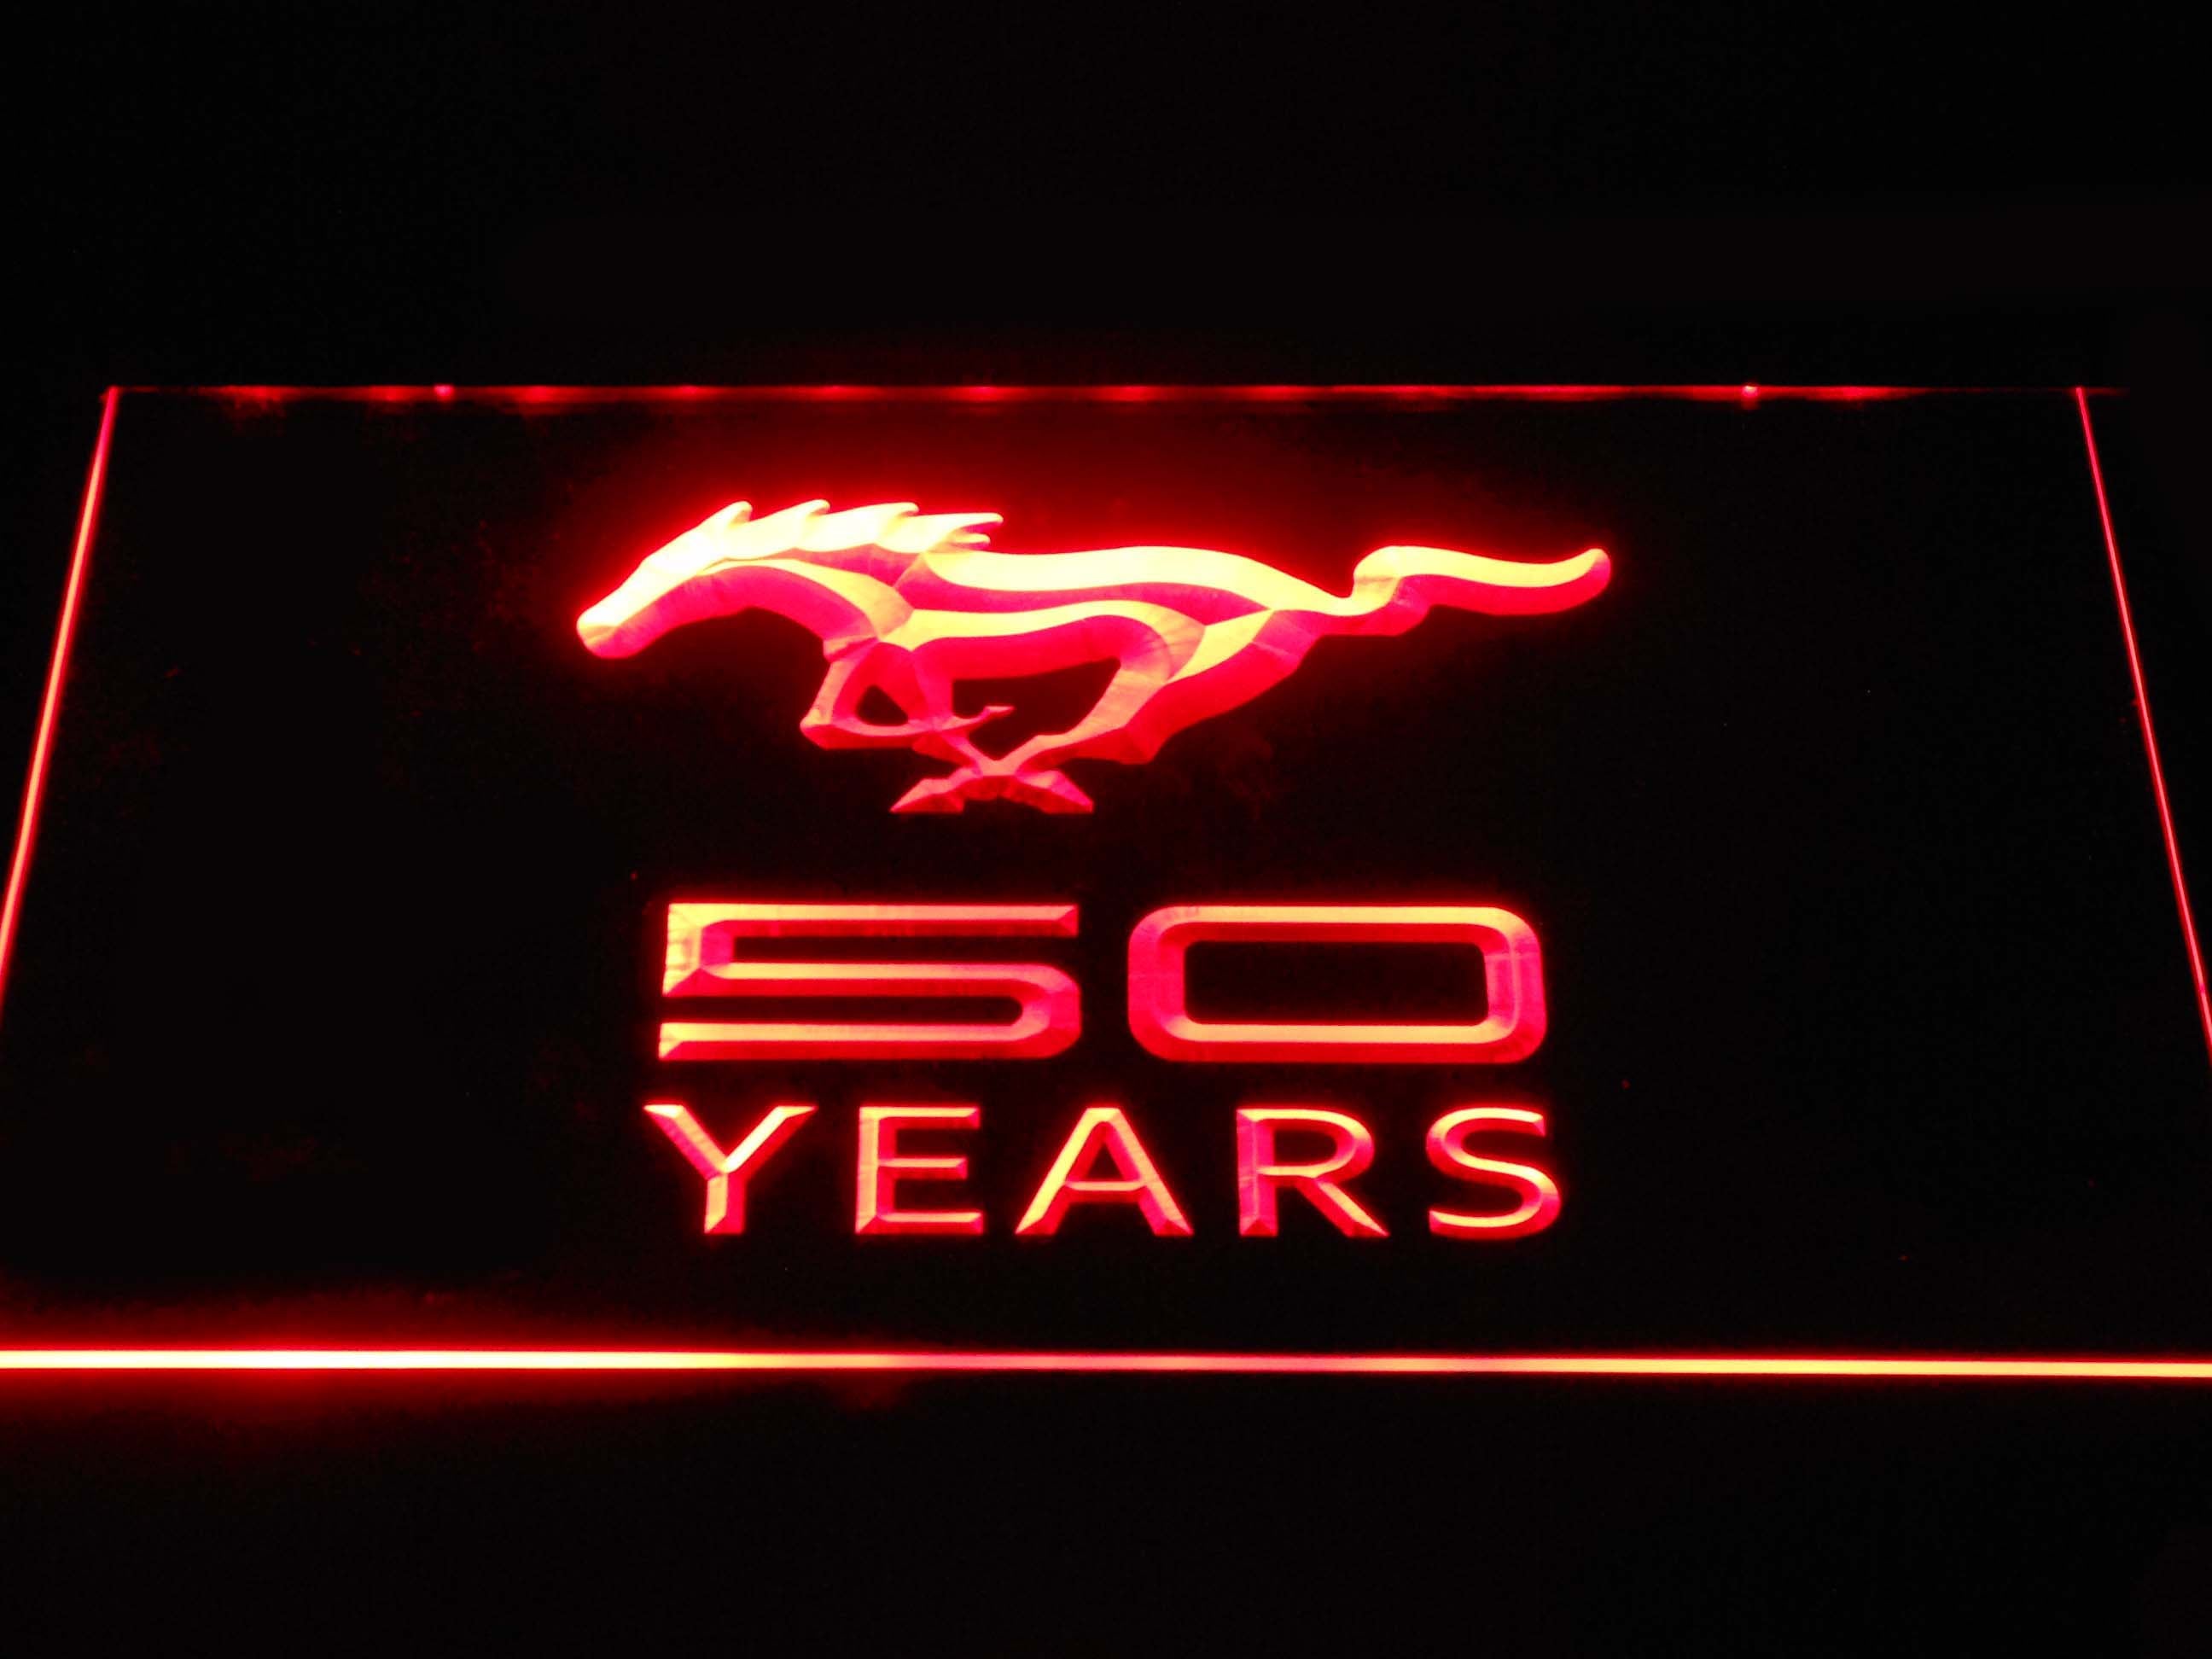 Ford Mustang 50 Years Neon Light LED Sign